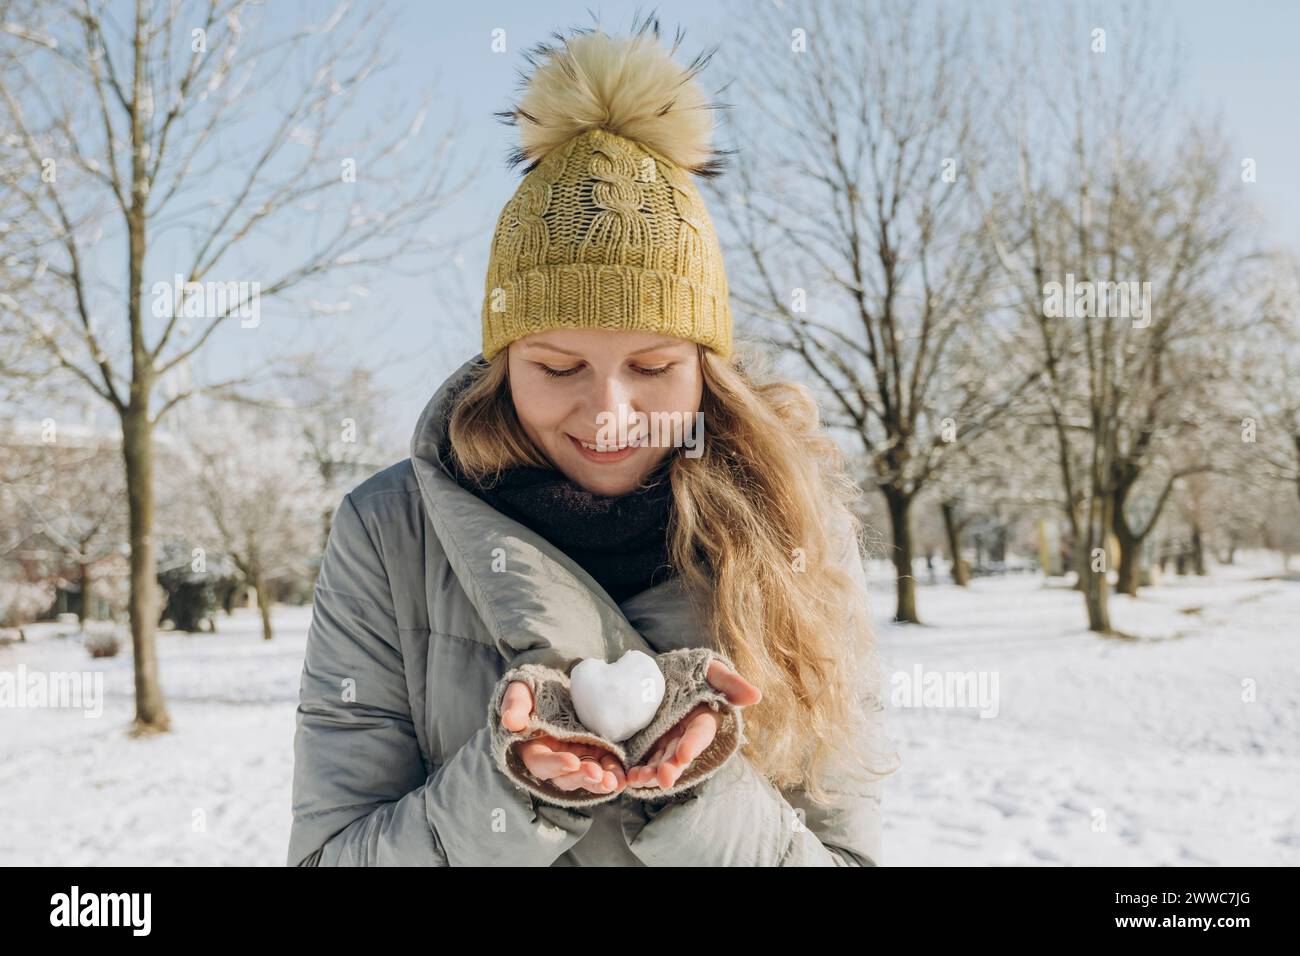 Smiling woman holding heart shaped snowball in hand Stock Photo